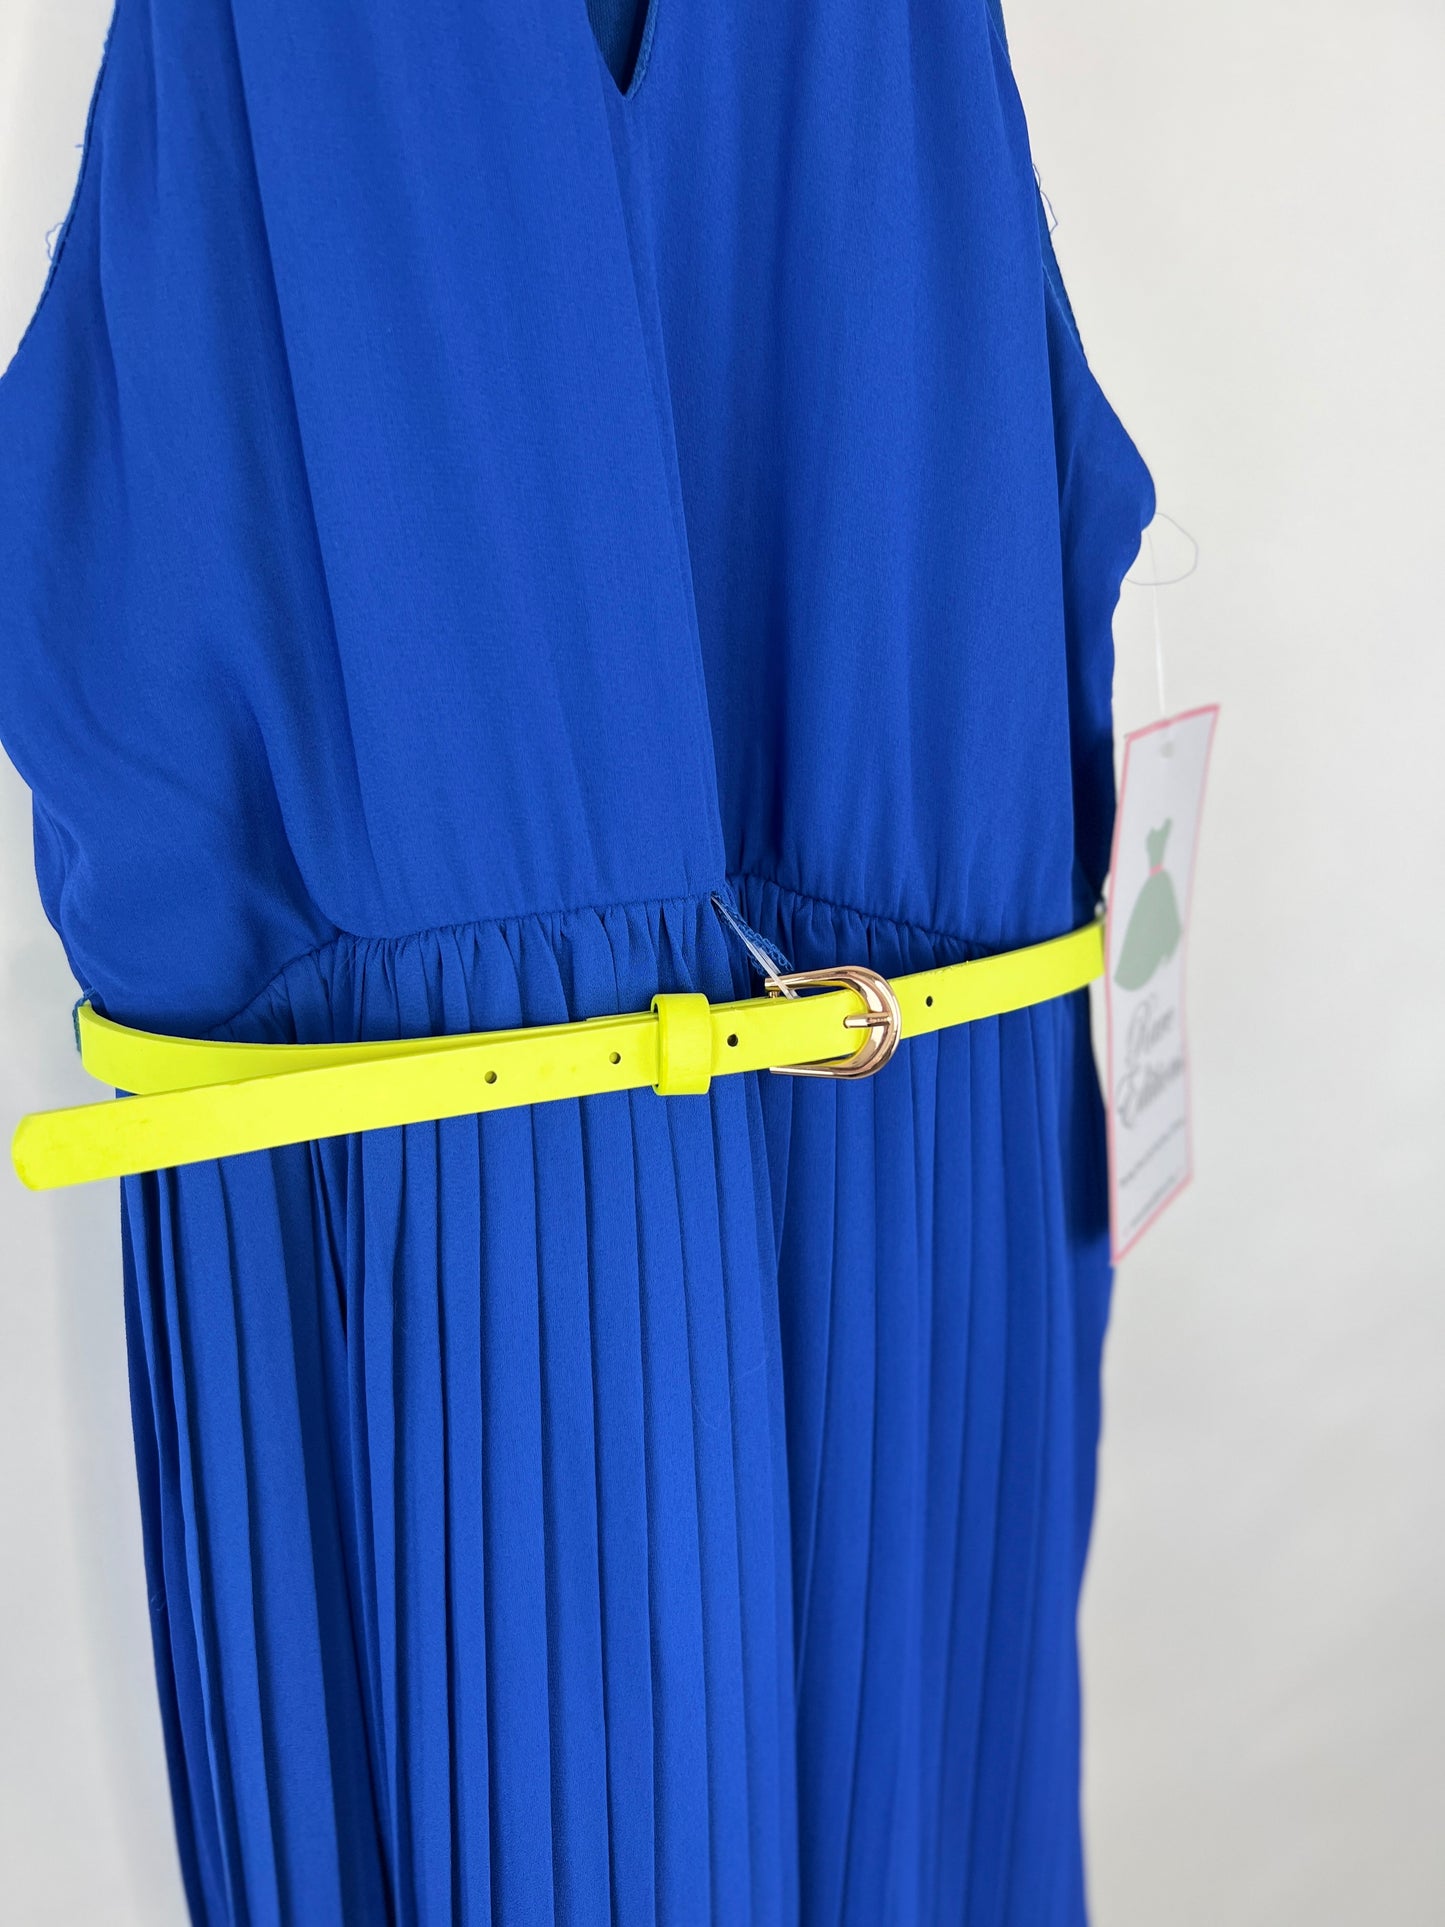 NWT - Rare Editions Cobalt Blue Belted Pleat Dress - M (10)